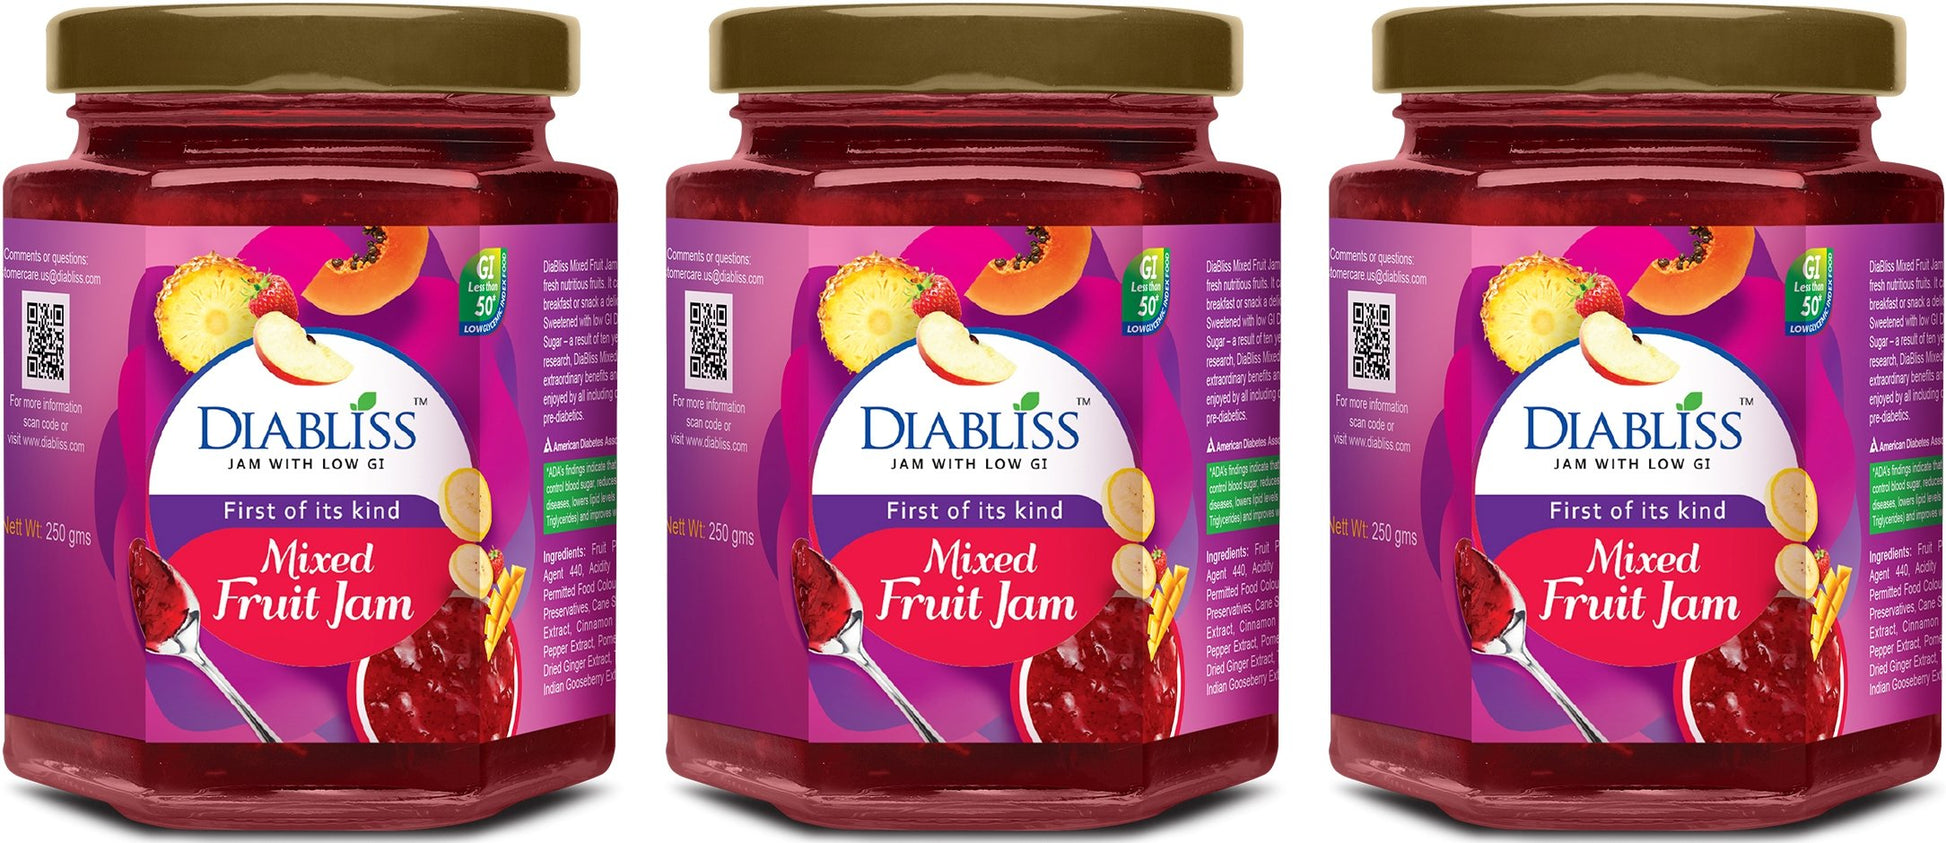 DIABLISS Diabetic Friendly Mixed Fruit Jam Made with Low GI Sugar - 250g Bottle Pack of 3 Combo